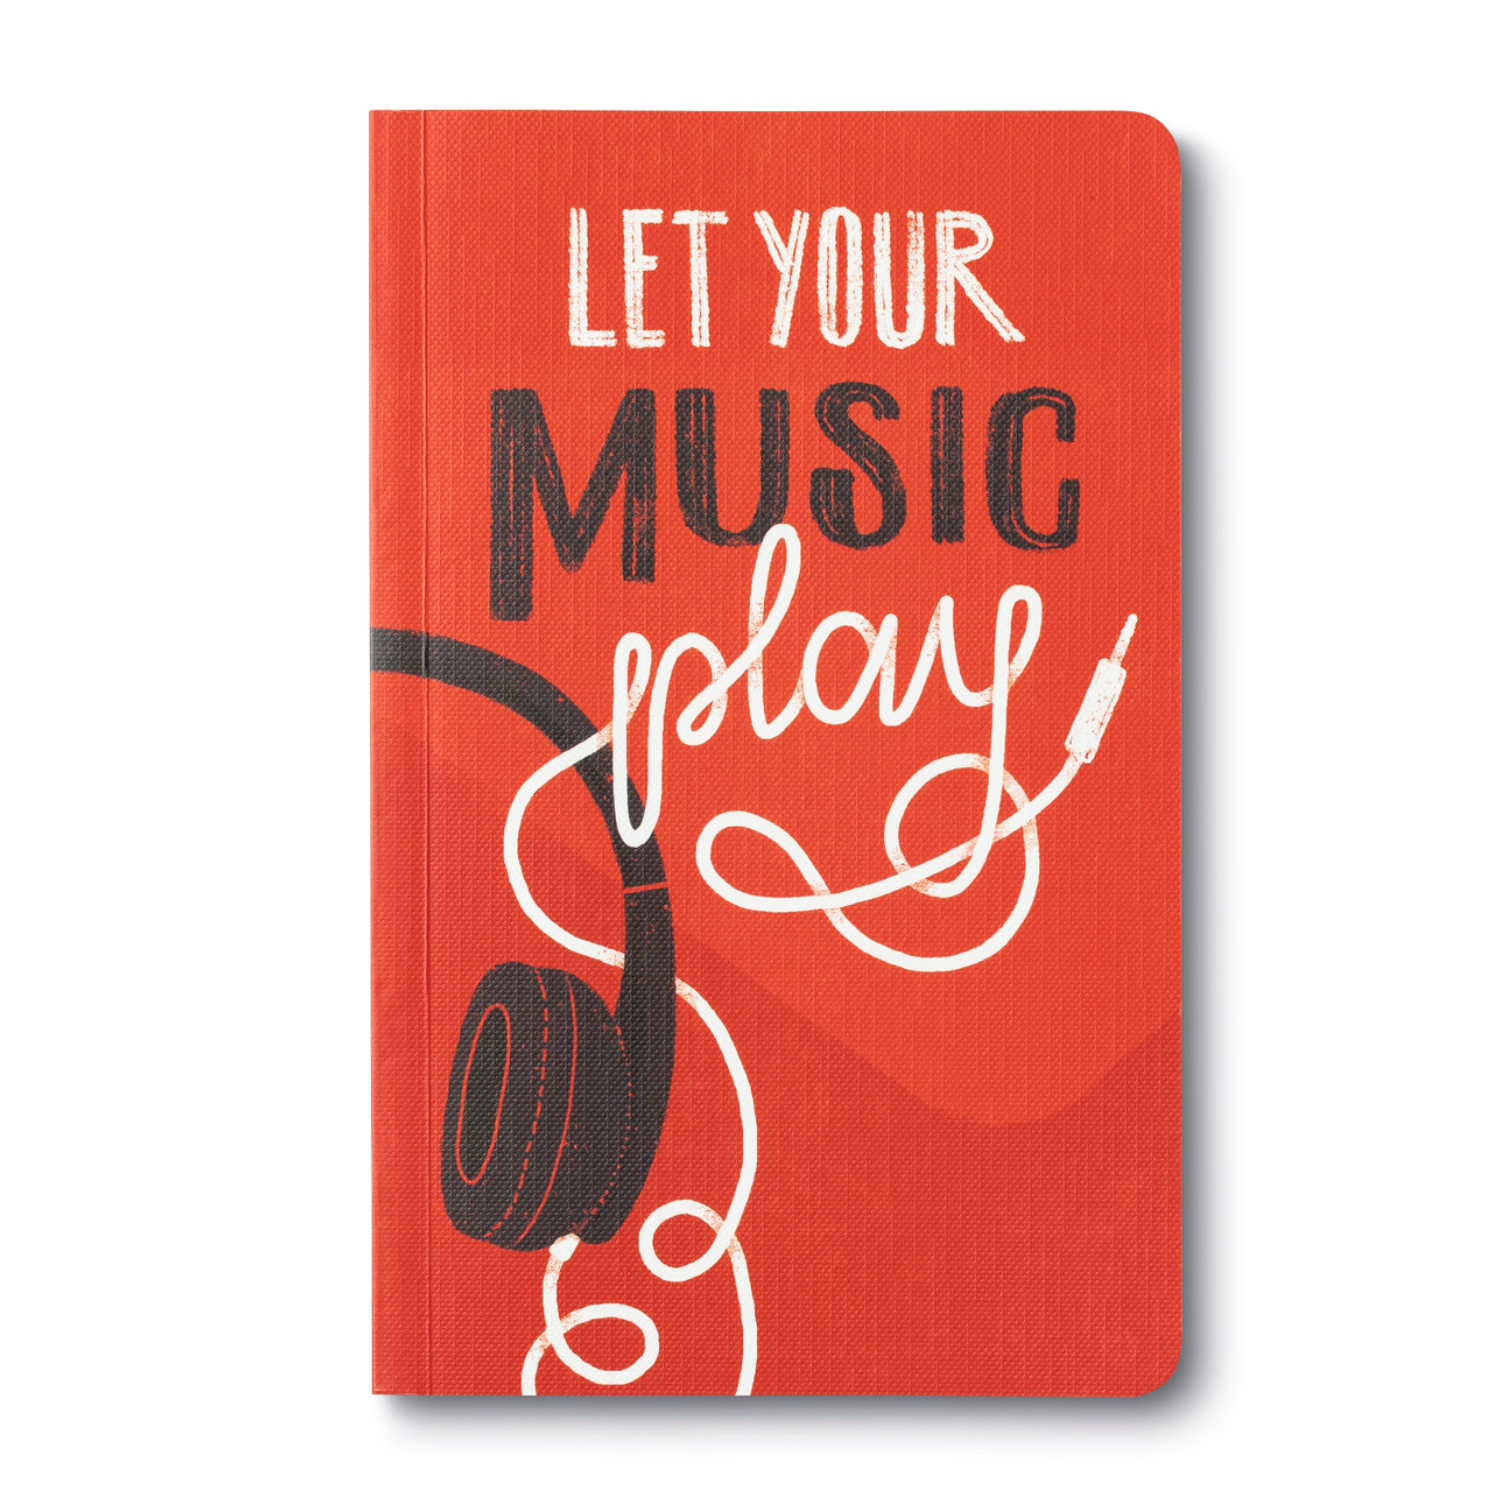 Let Your Music Play softcover Journal 